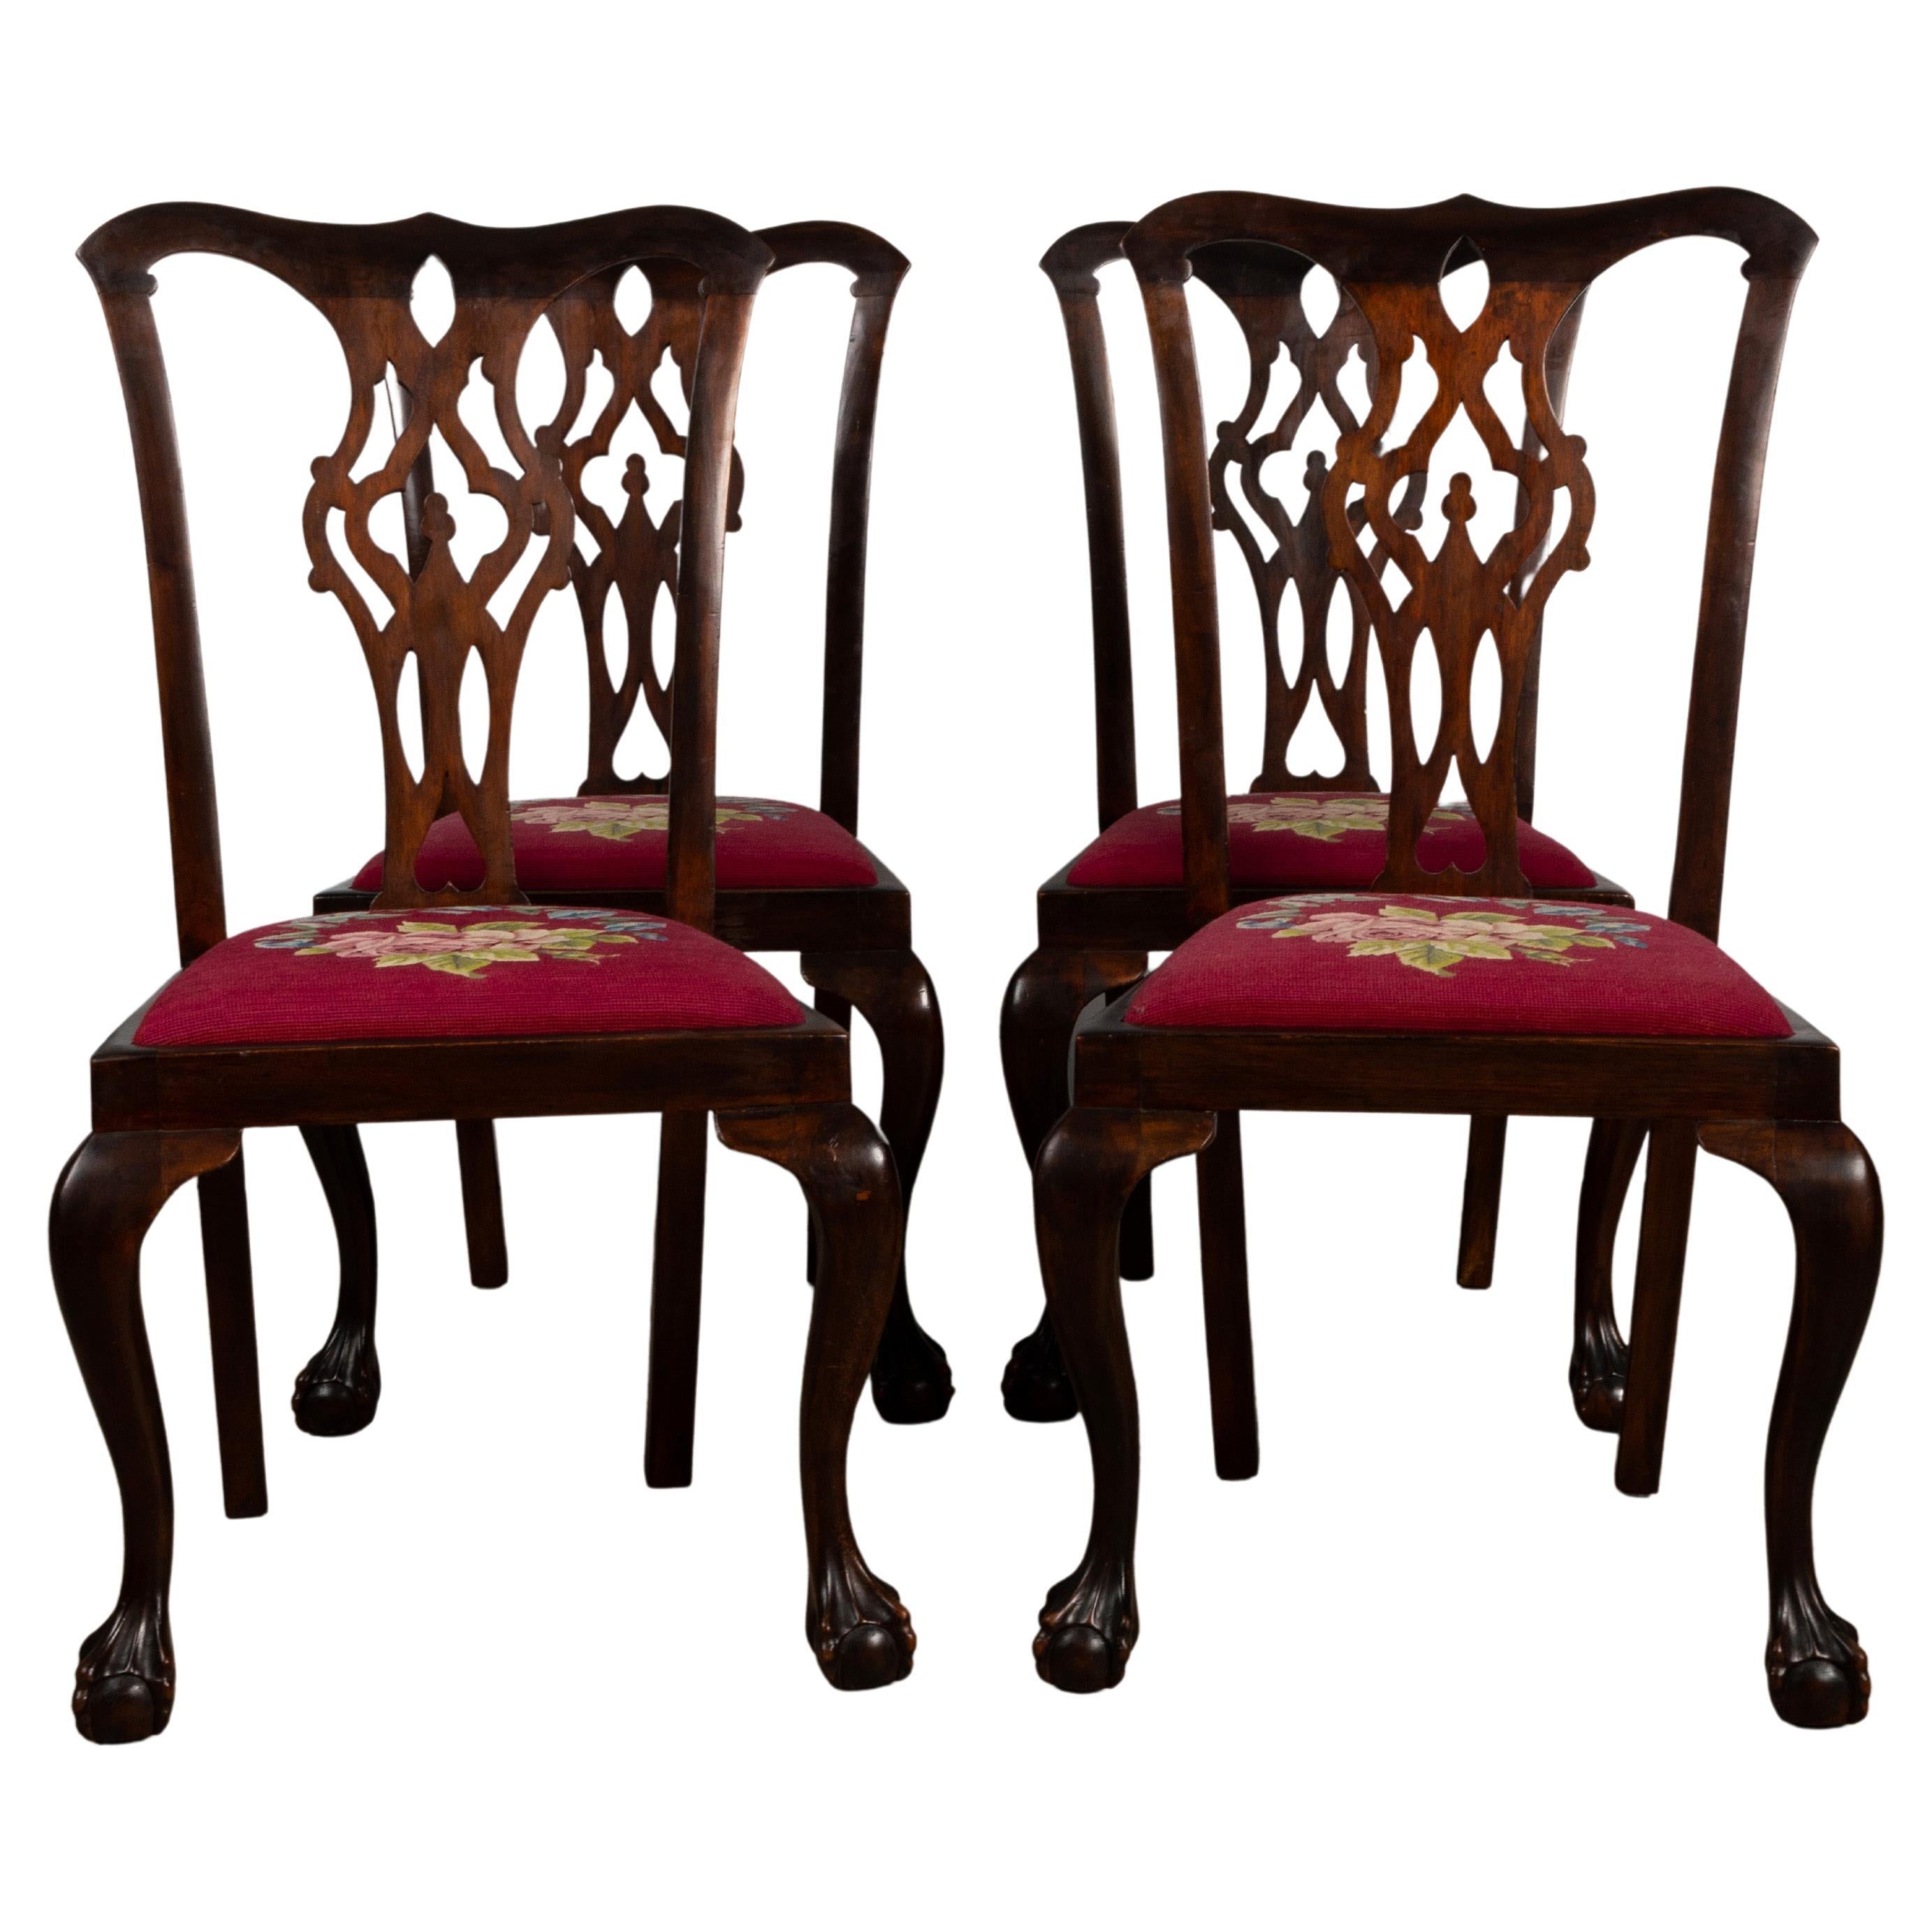 4 Antique English 19th Century Chippendale Revival Mahogany Chairs